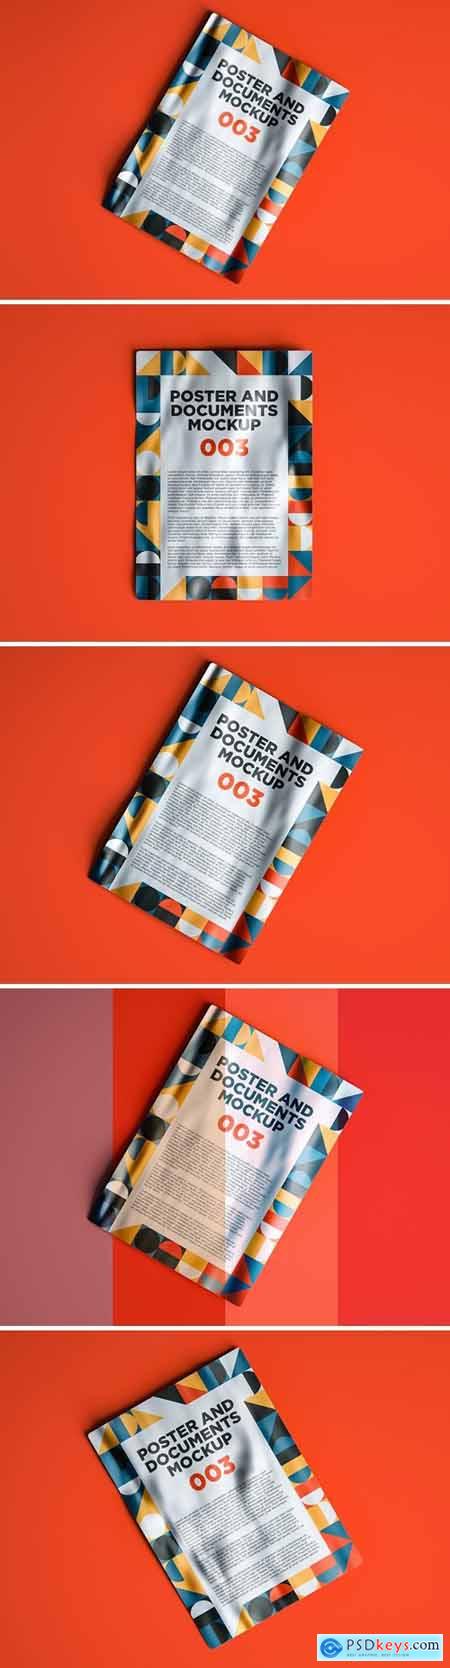 Poster And Documents Mockup 003